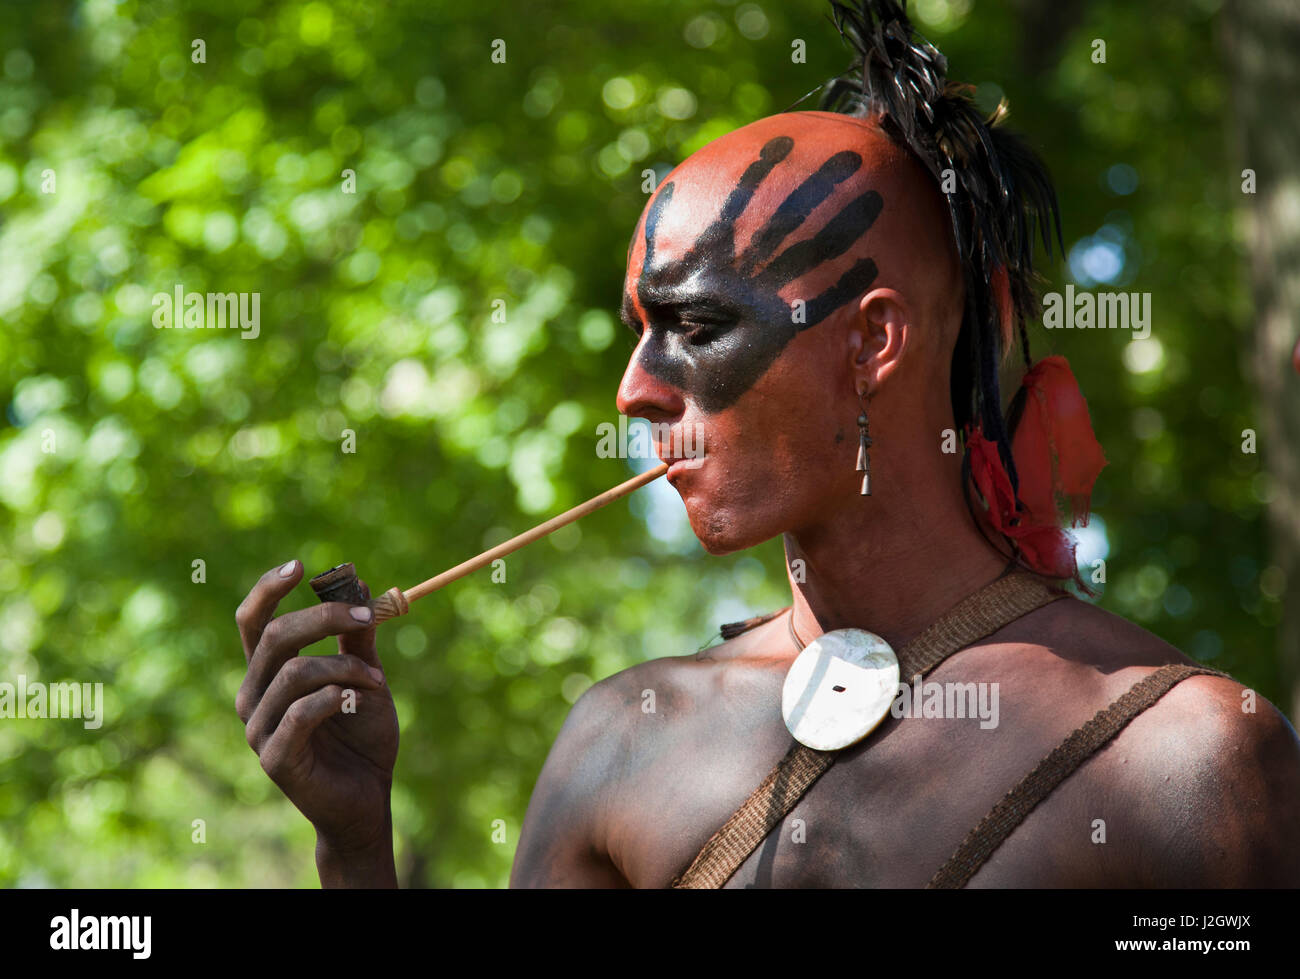 American Indian War Paint High Resolution Stock Photography and Images -  Alamy